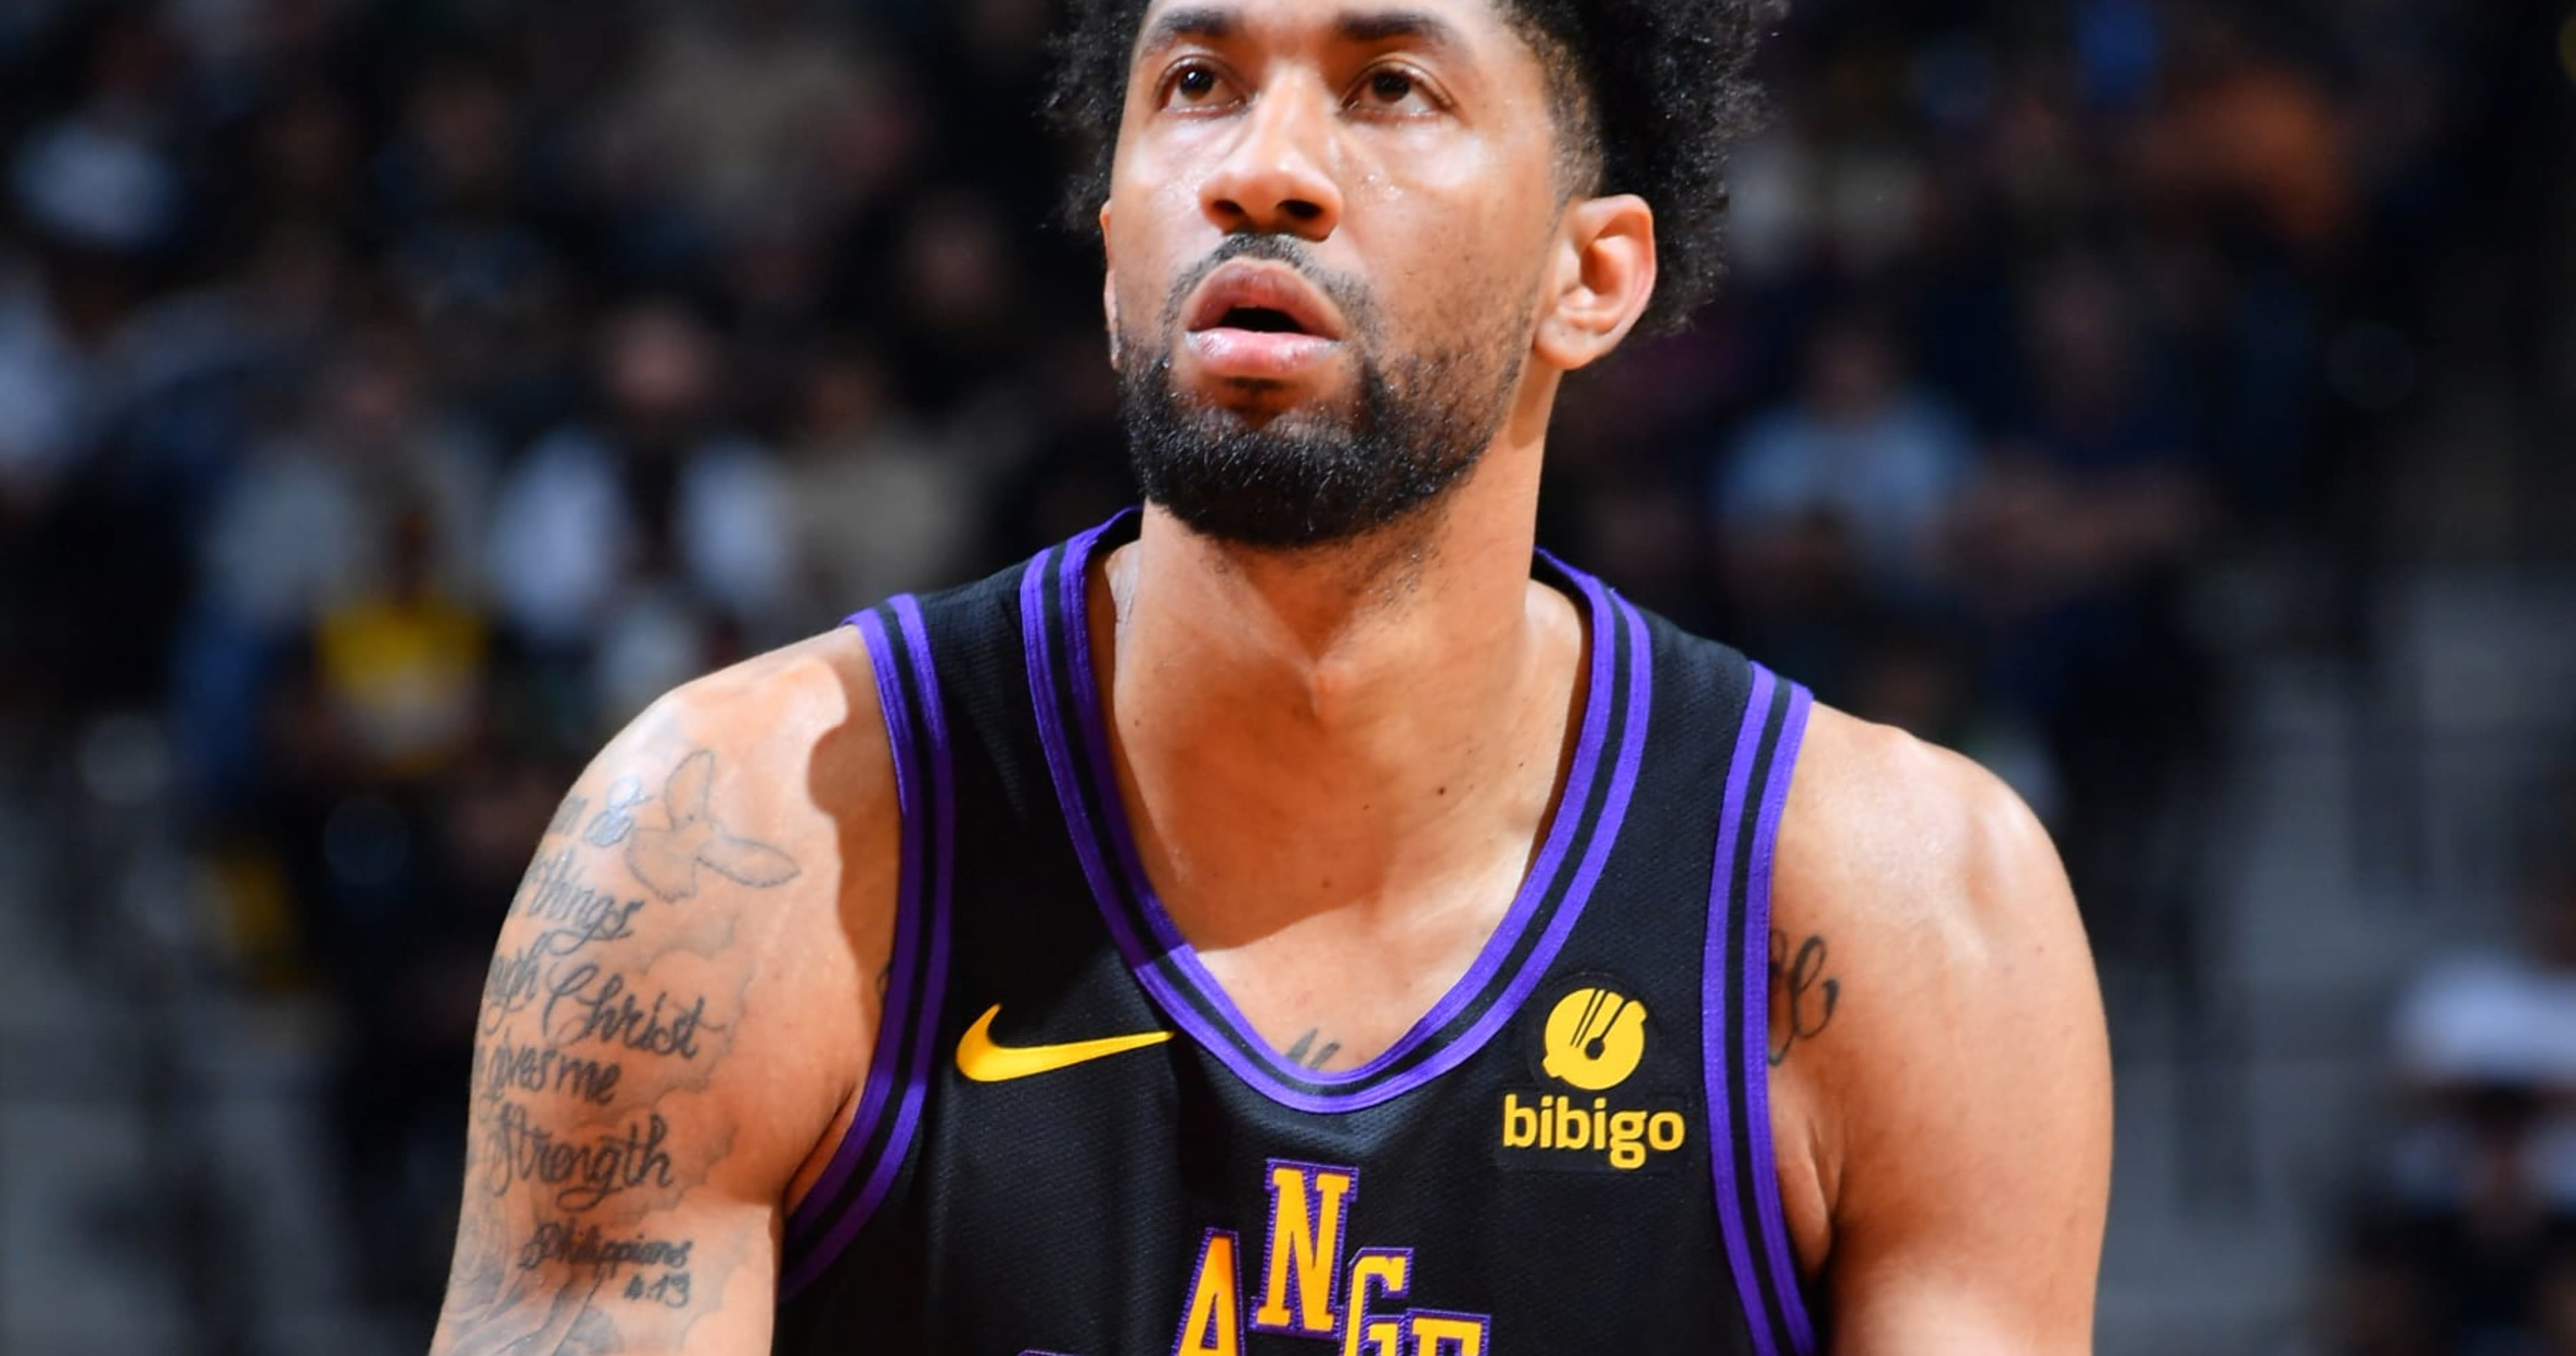 Lakers' Christian Wood Denies Domestic Violence Allegations Made by Ex-Girlfriend